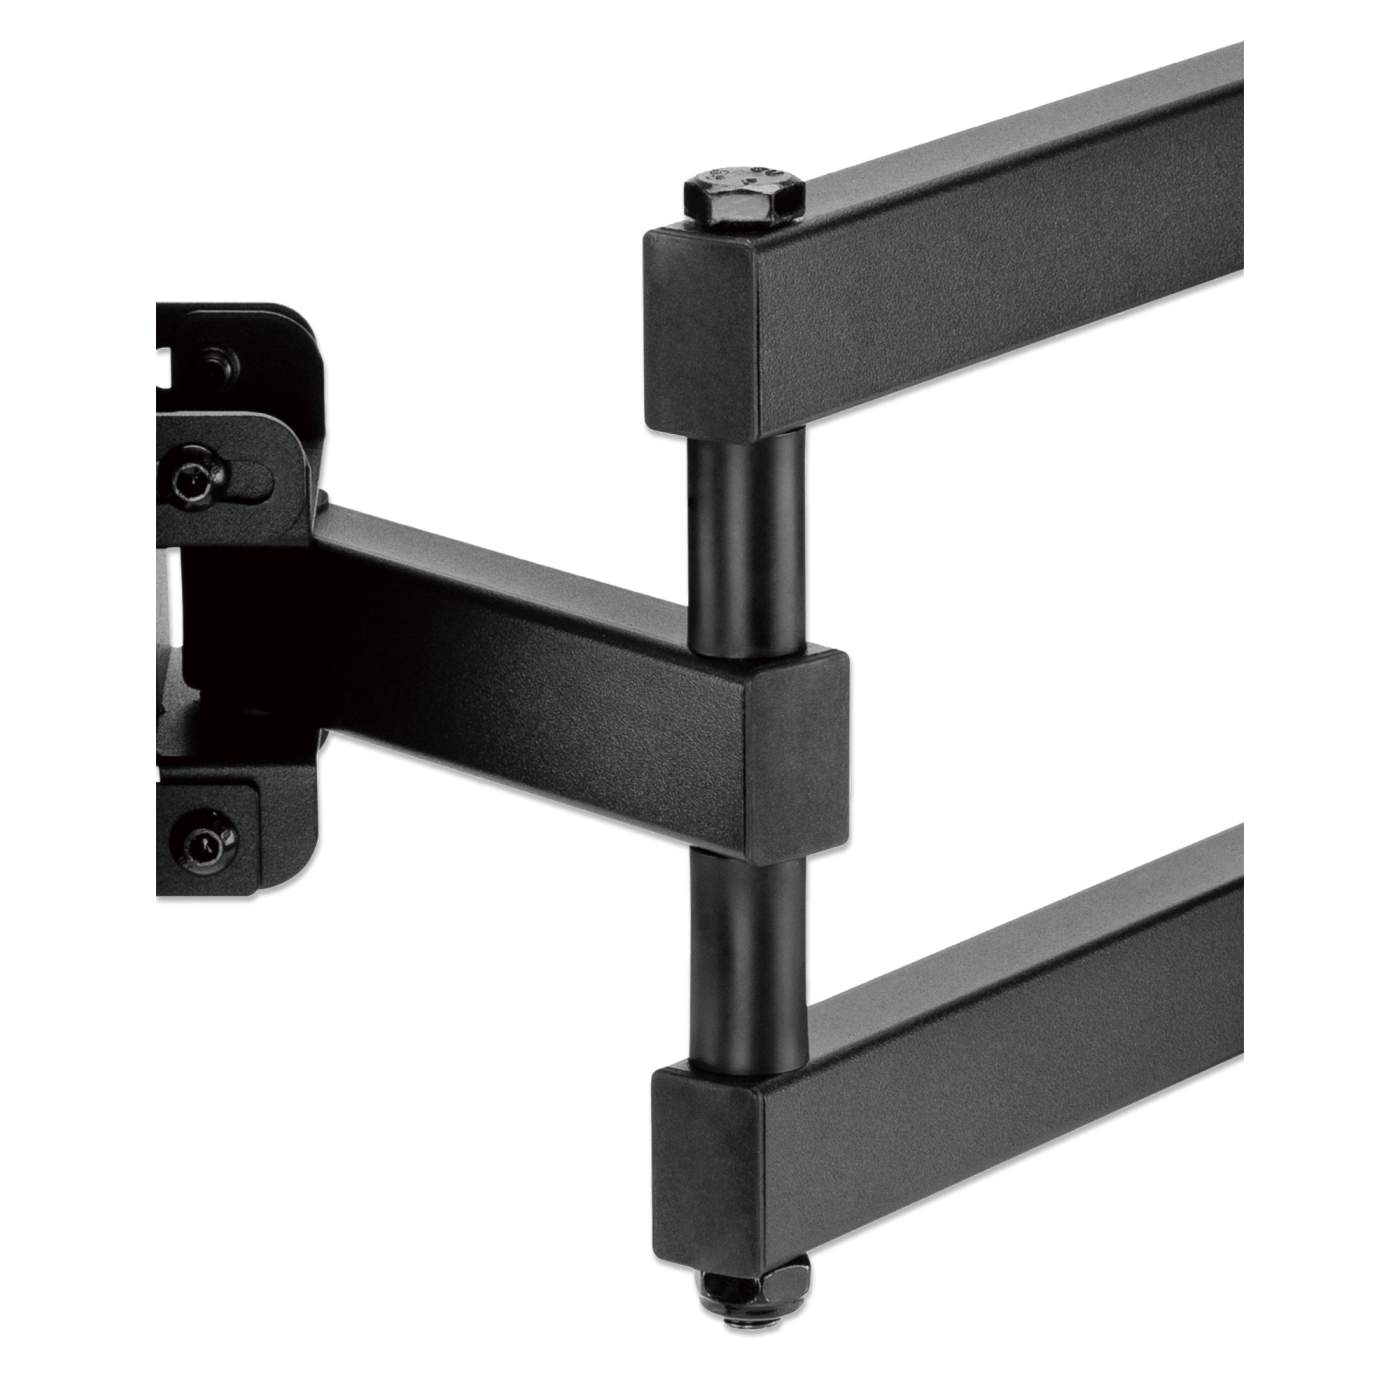 Full-Motion TV Wall Mount with Post-Leveling Adjustment Image 7